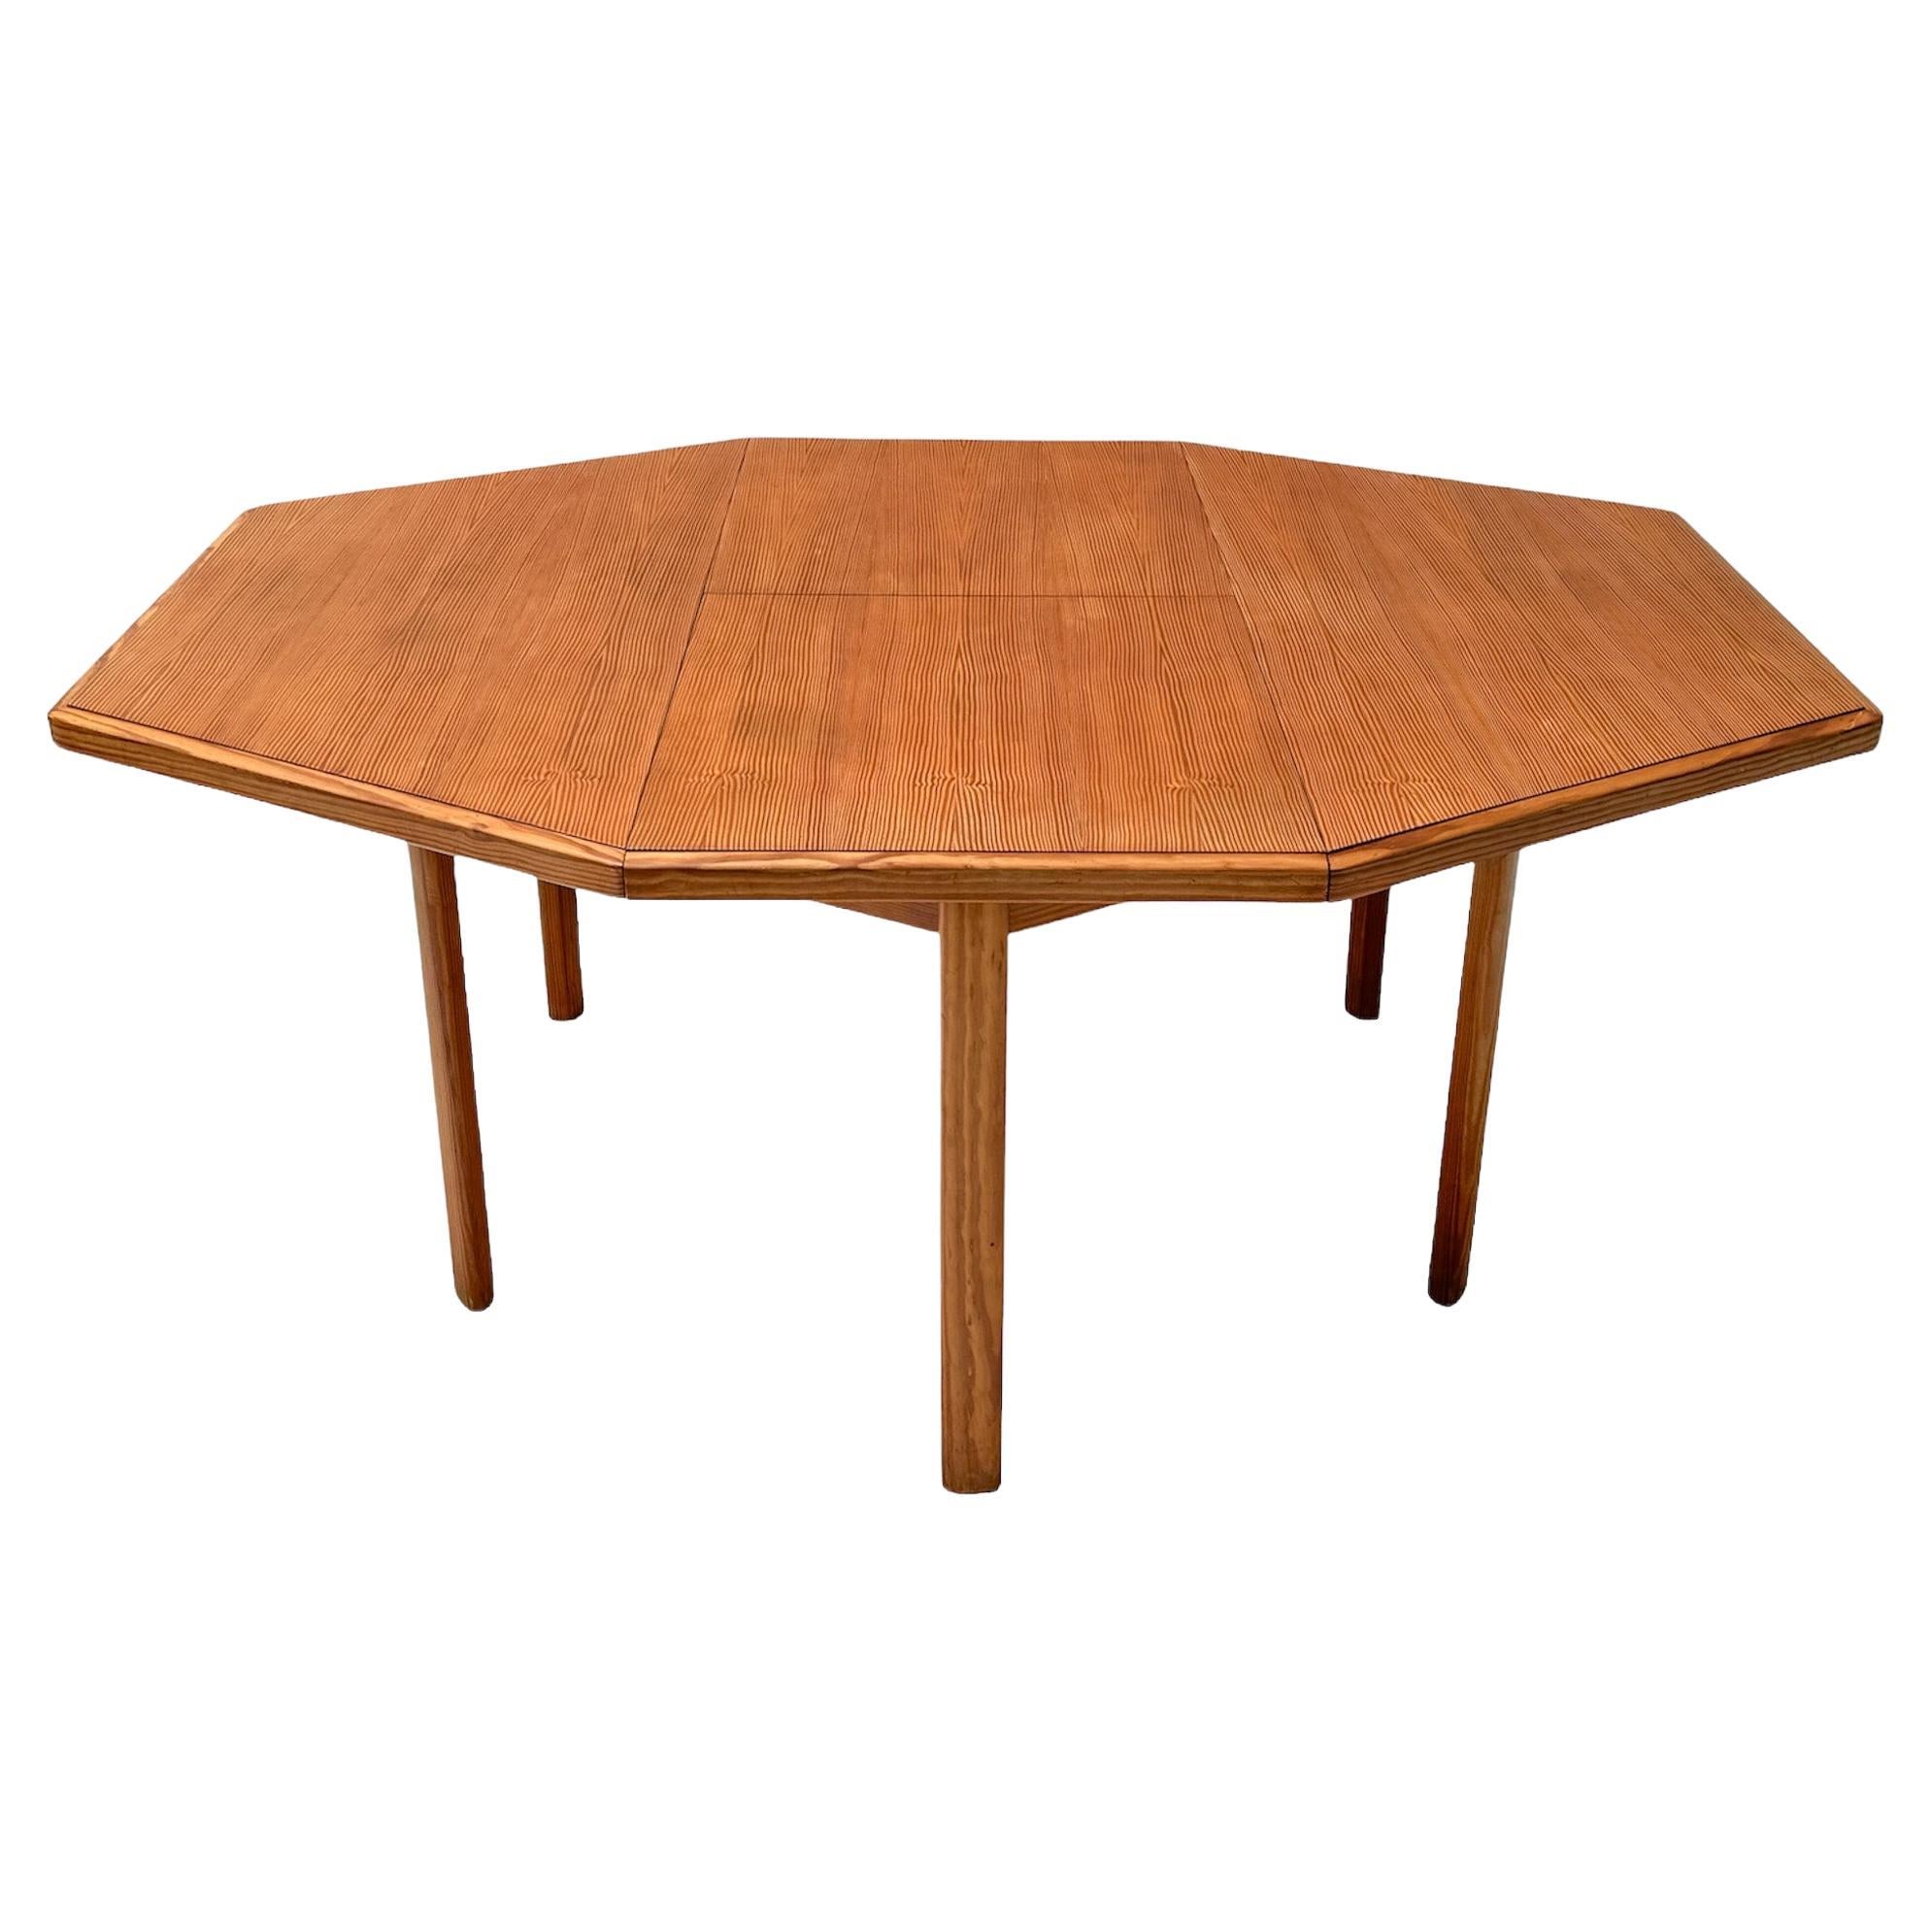 French Pine Mid-Century Modern Extendable Dining Room Table, 1970s For Sale